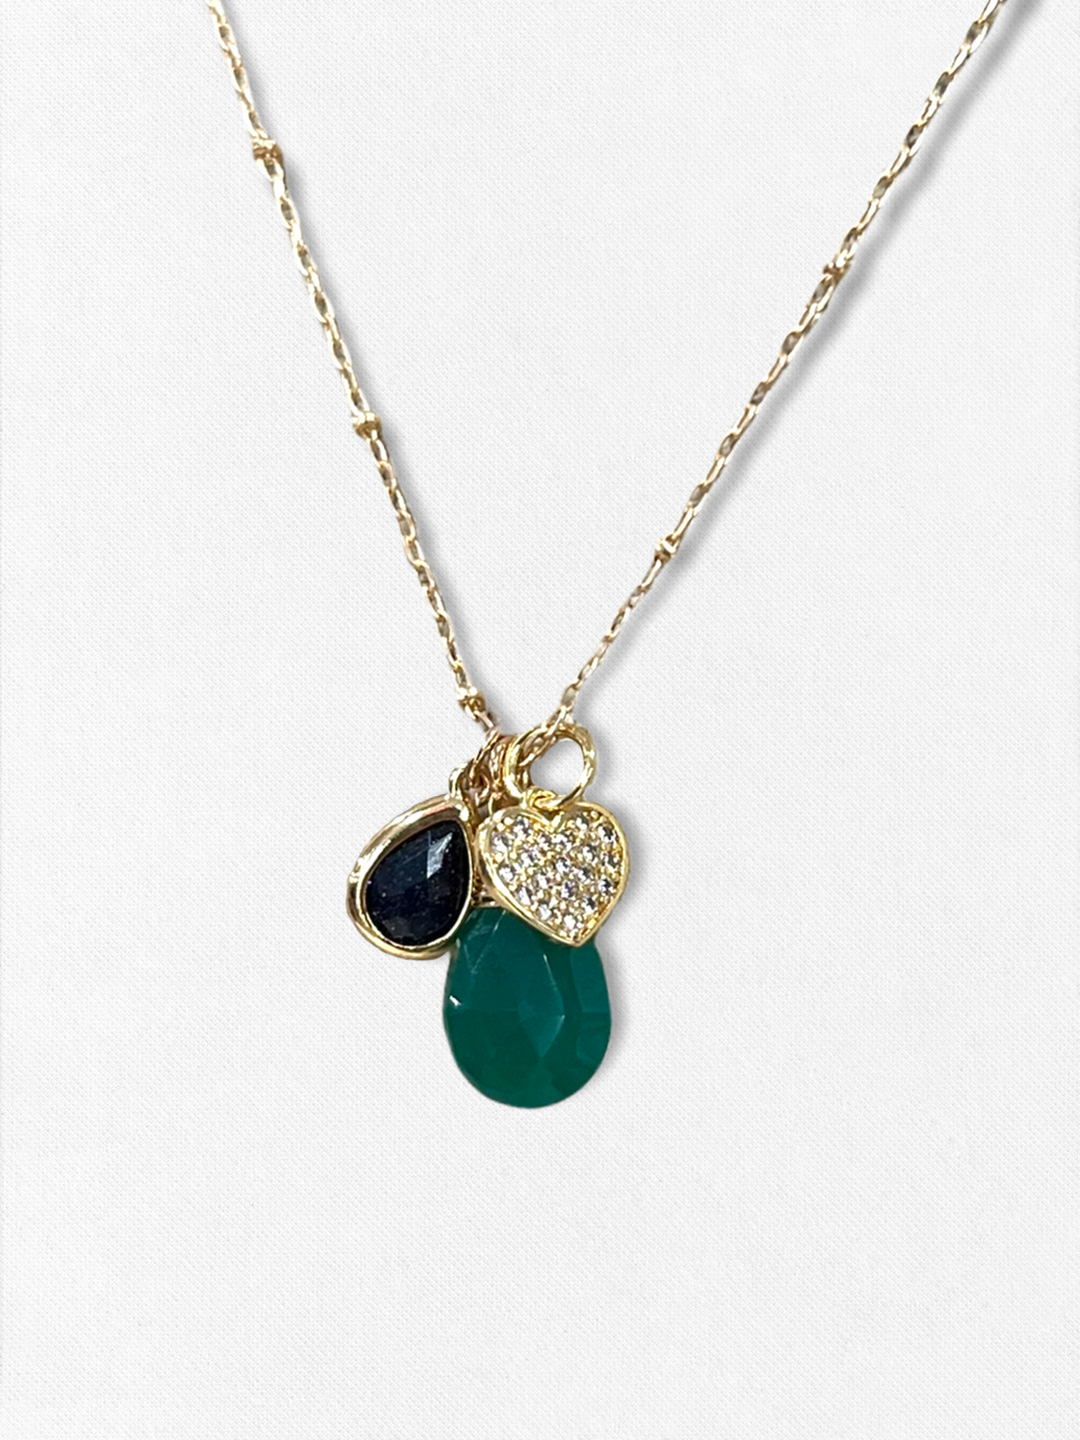 GREEN AGATE PENDANT MIX CHARM NECKLACE - Kingfisher Road - Online Boutique